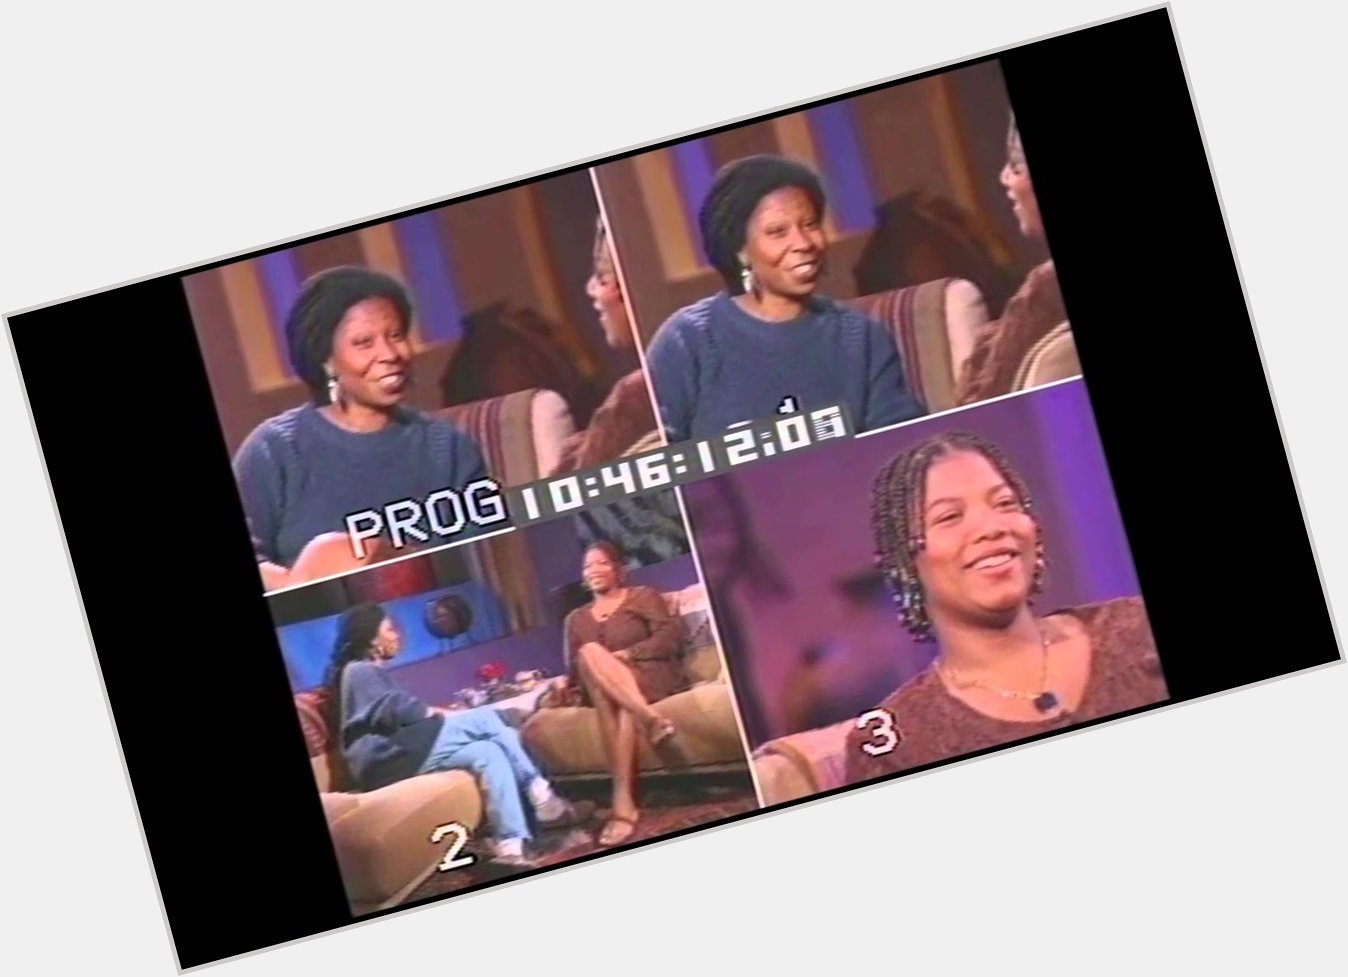 Whoopi goldberg interviewing queen latifah on her late-night talk show in the 90s. happy birthday whoopi! 